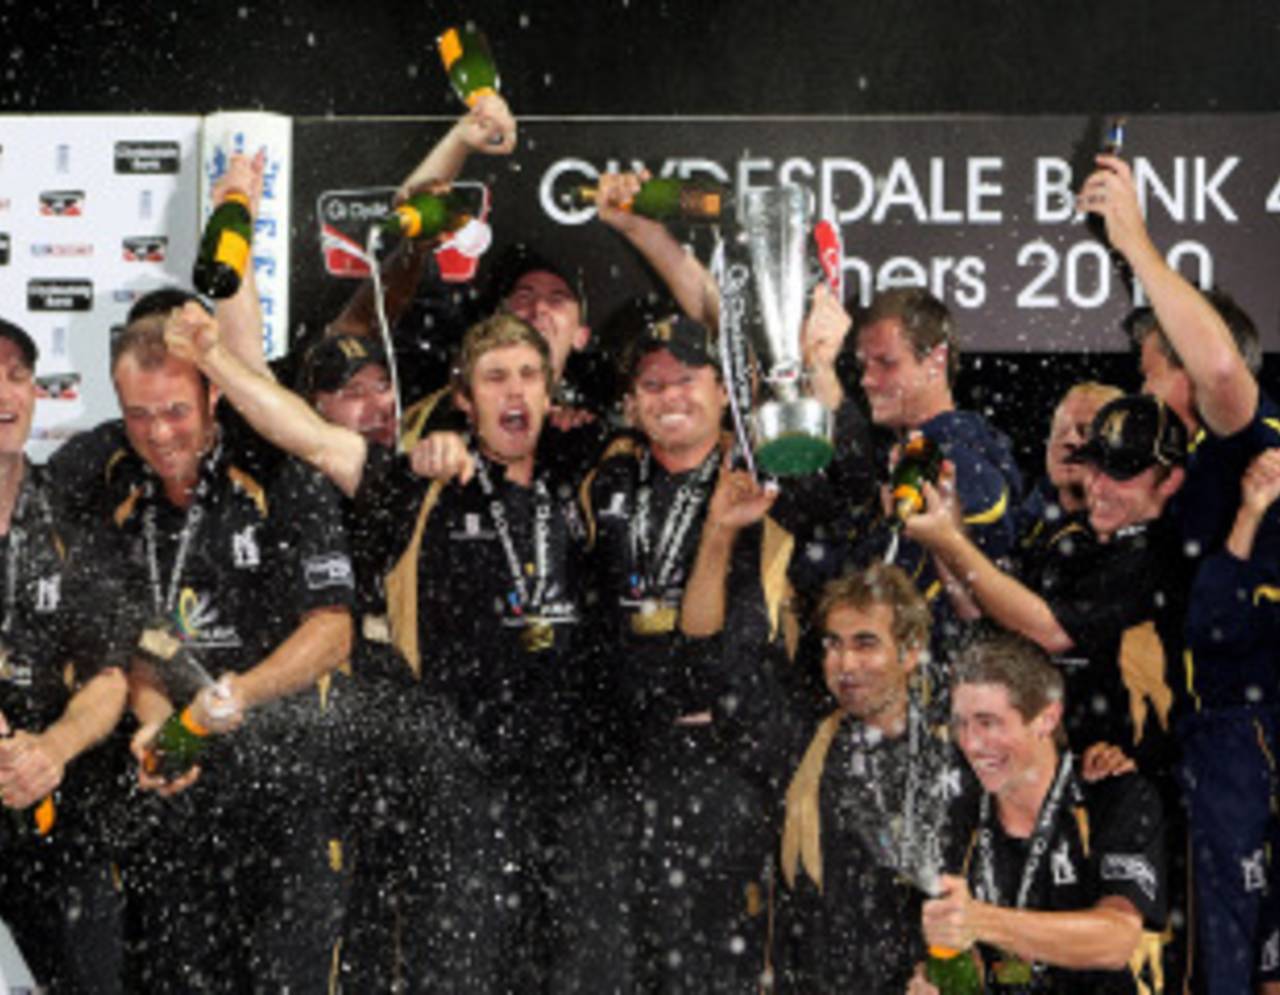 Warwickshire secured the CB40 title at Lord's after a century from Ian Bell&nbsp;&nbsp;&bull;&nbsp;&nbsp;Getty Images